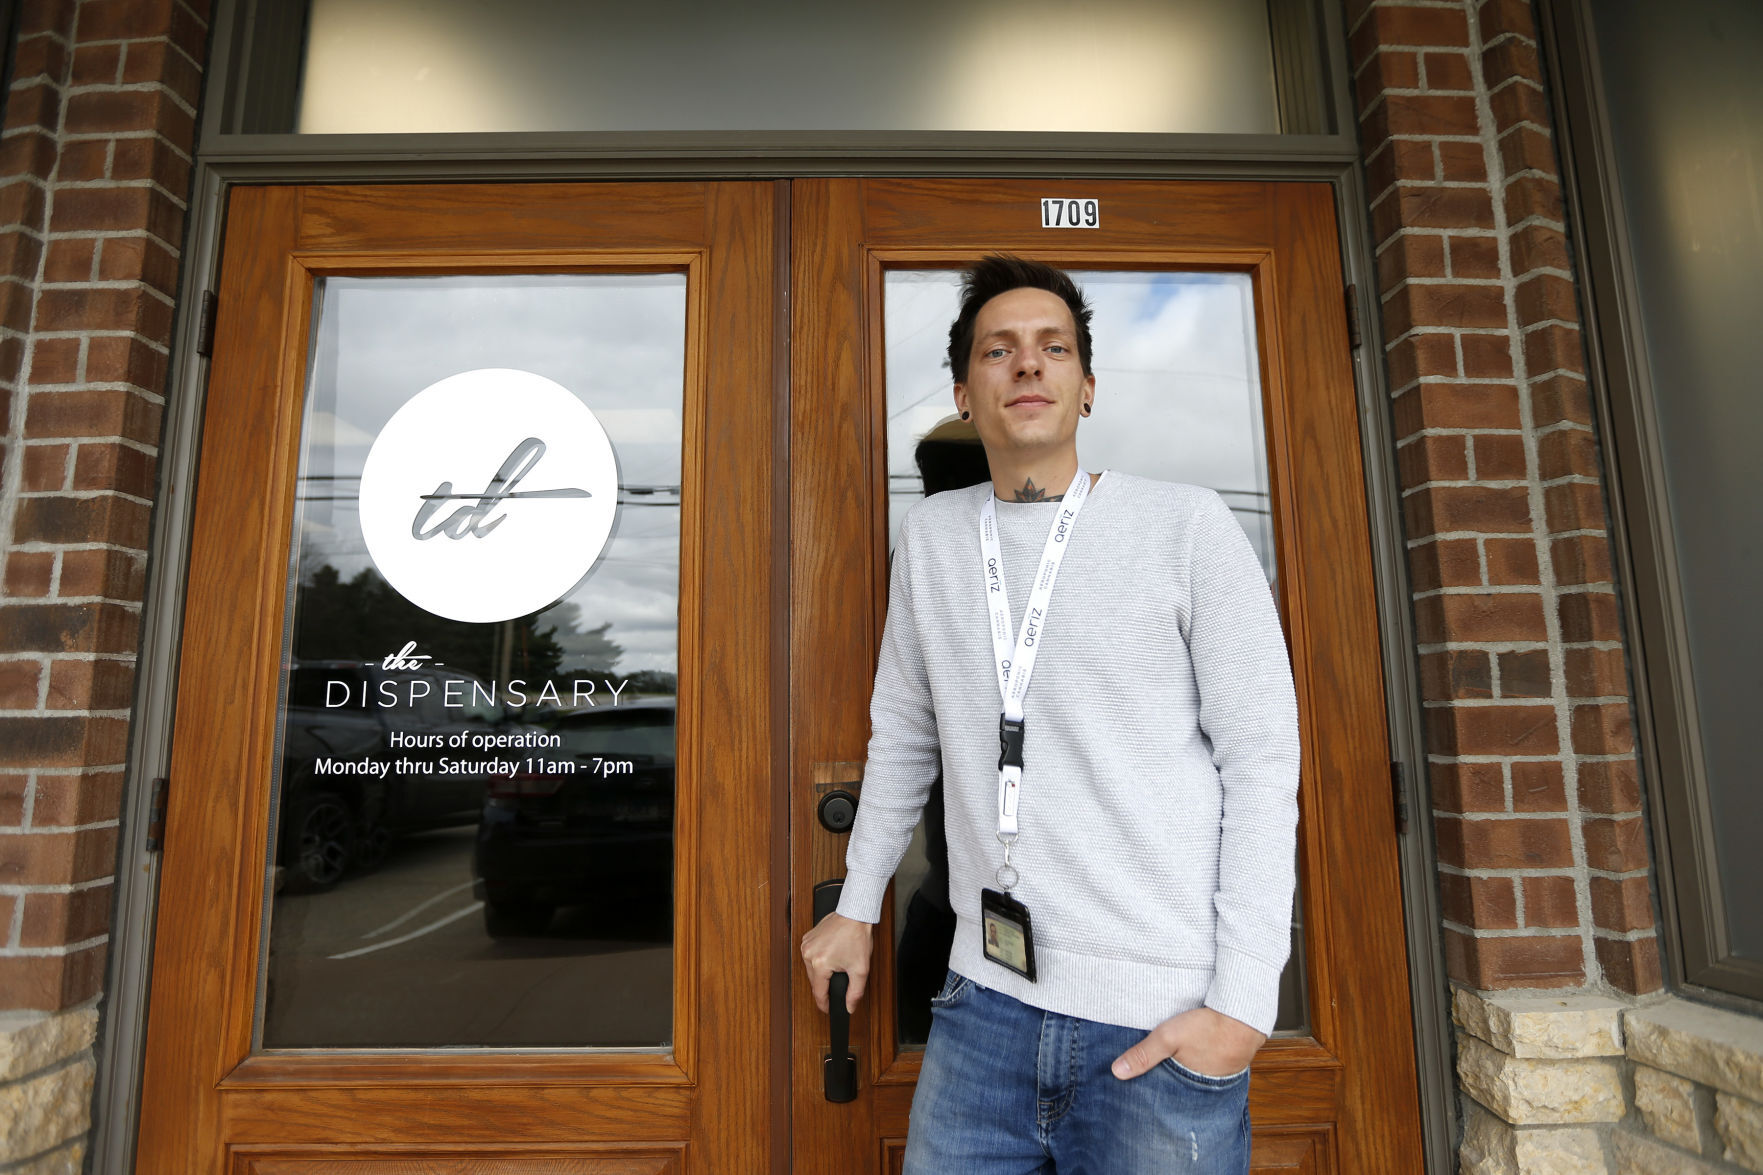 Director of Retail Jeff Soenksen stands outside The Dispensary in East Dubuque, Ill., on Thursday. The Dispensary is expected to open soon. PHOTO CREDIT: Dave Kettering